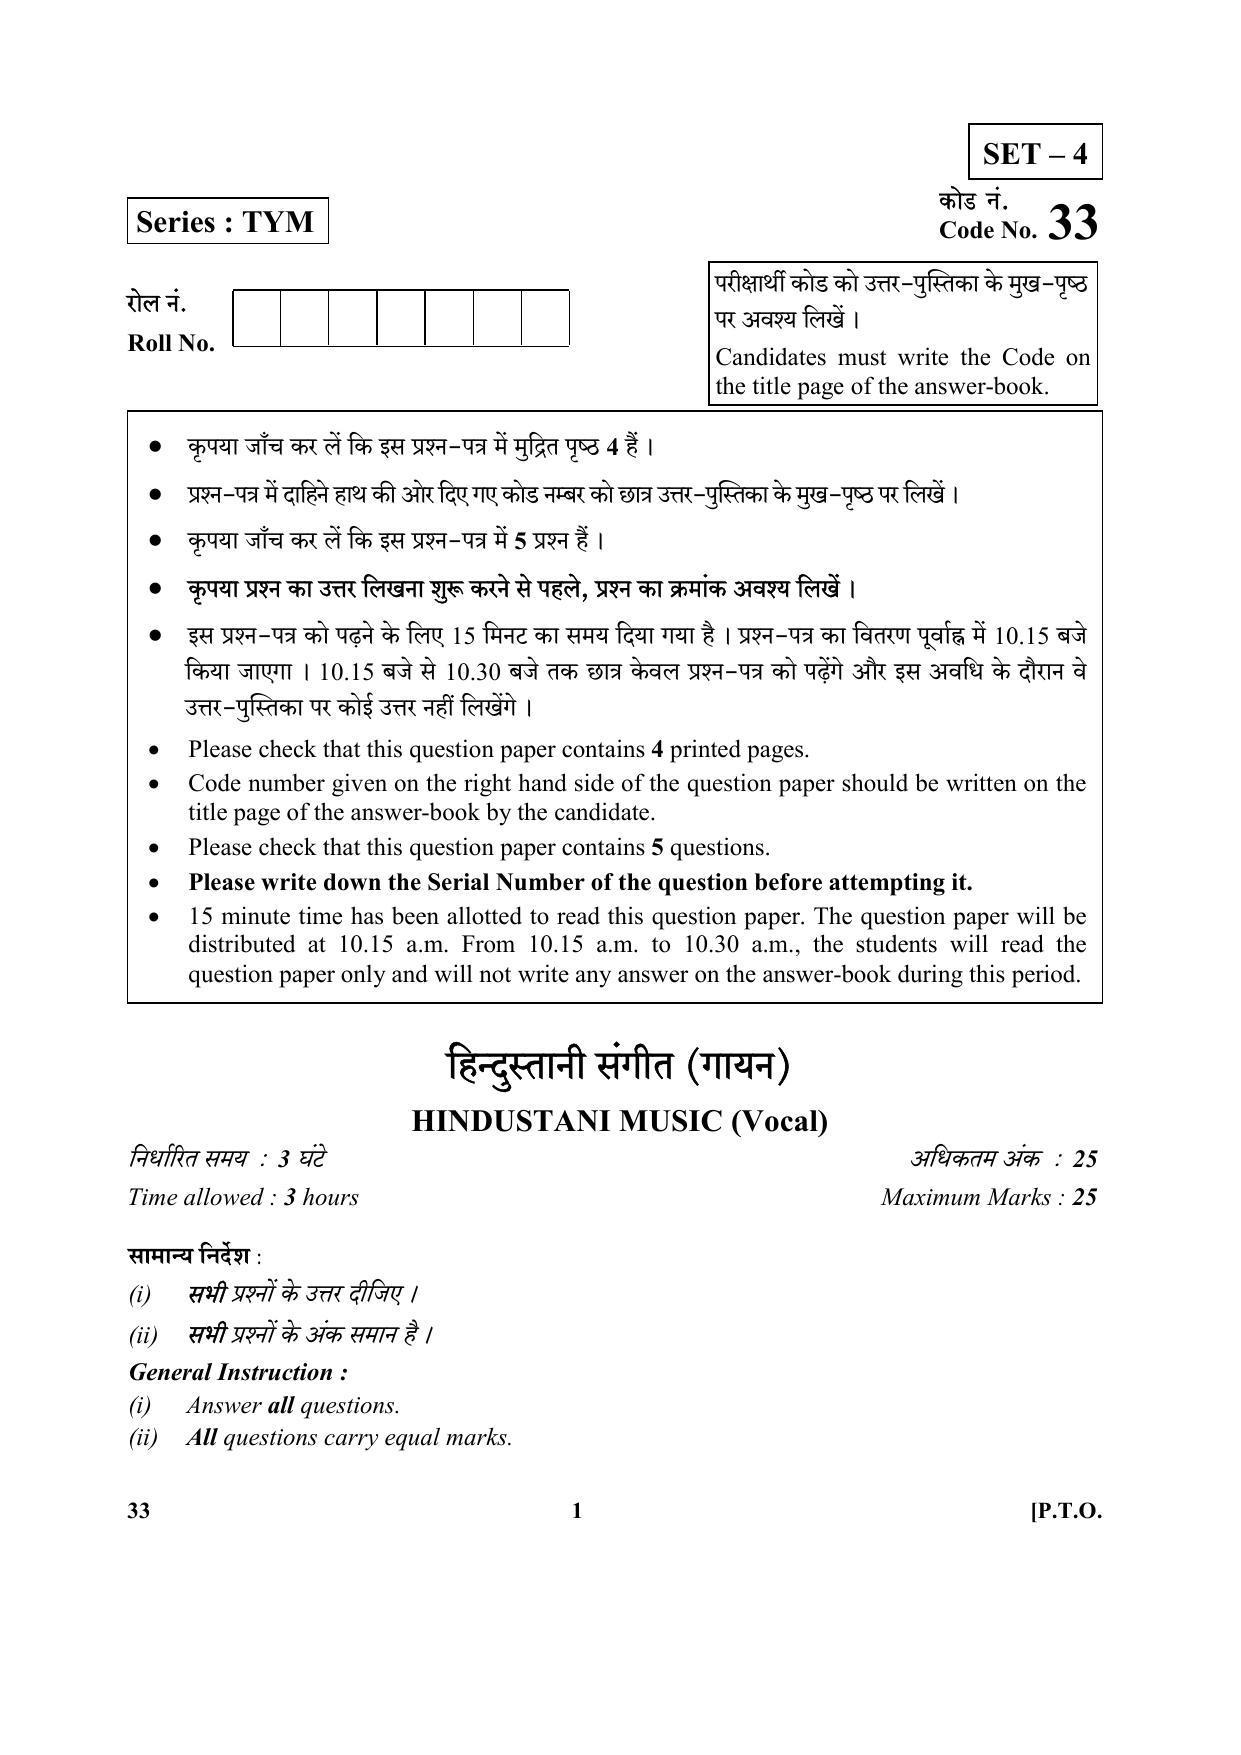 CBSE Class 10 33 (Hindustani Music Vocal) 2018 Question Paper - Page 1